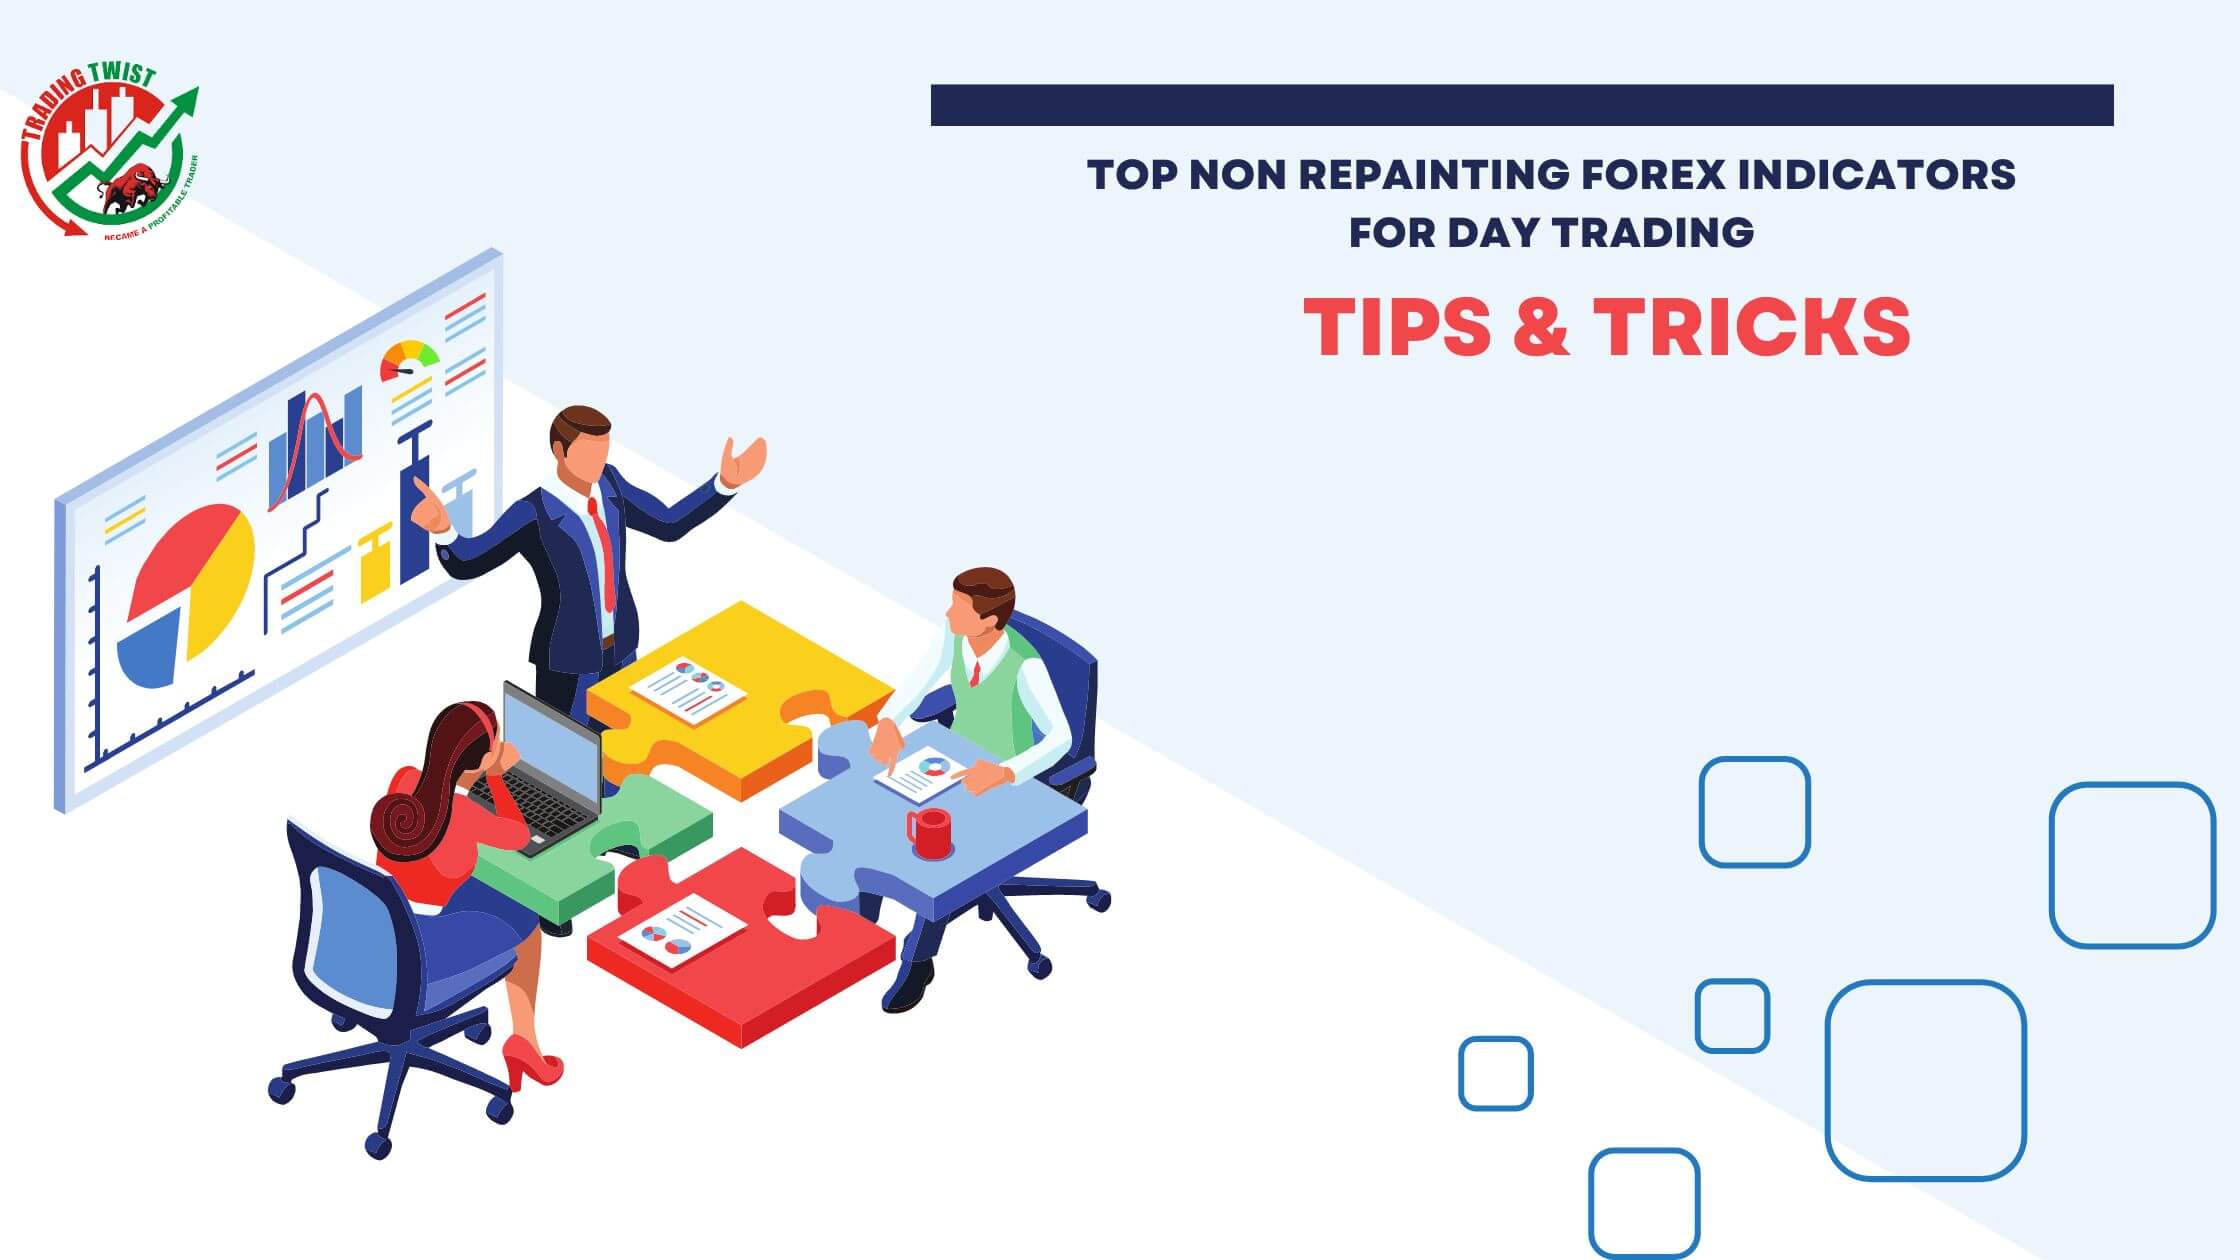 Top Non Repainting Forex Indicators for Day Trading